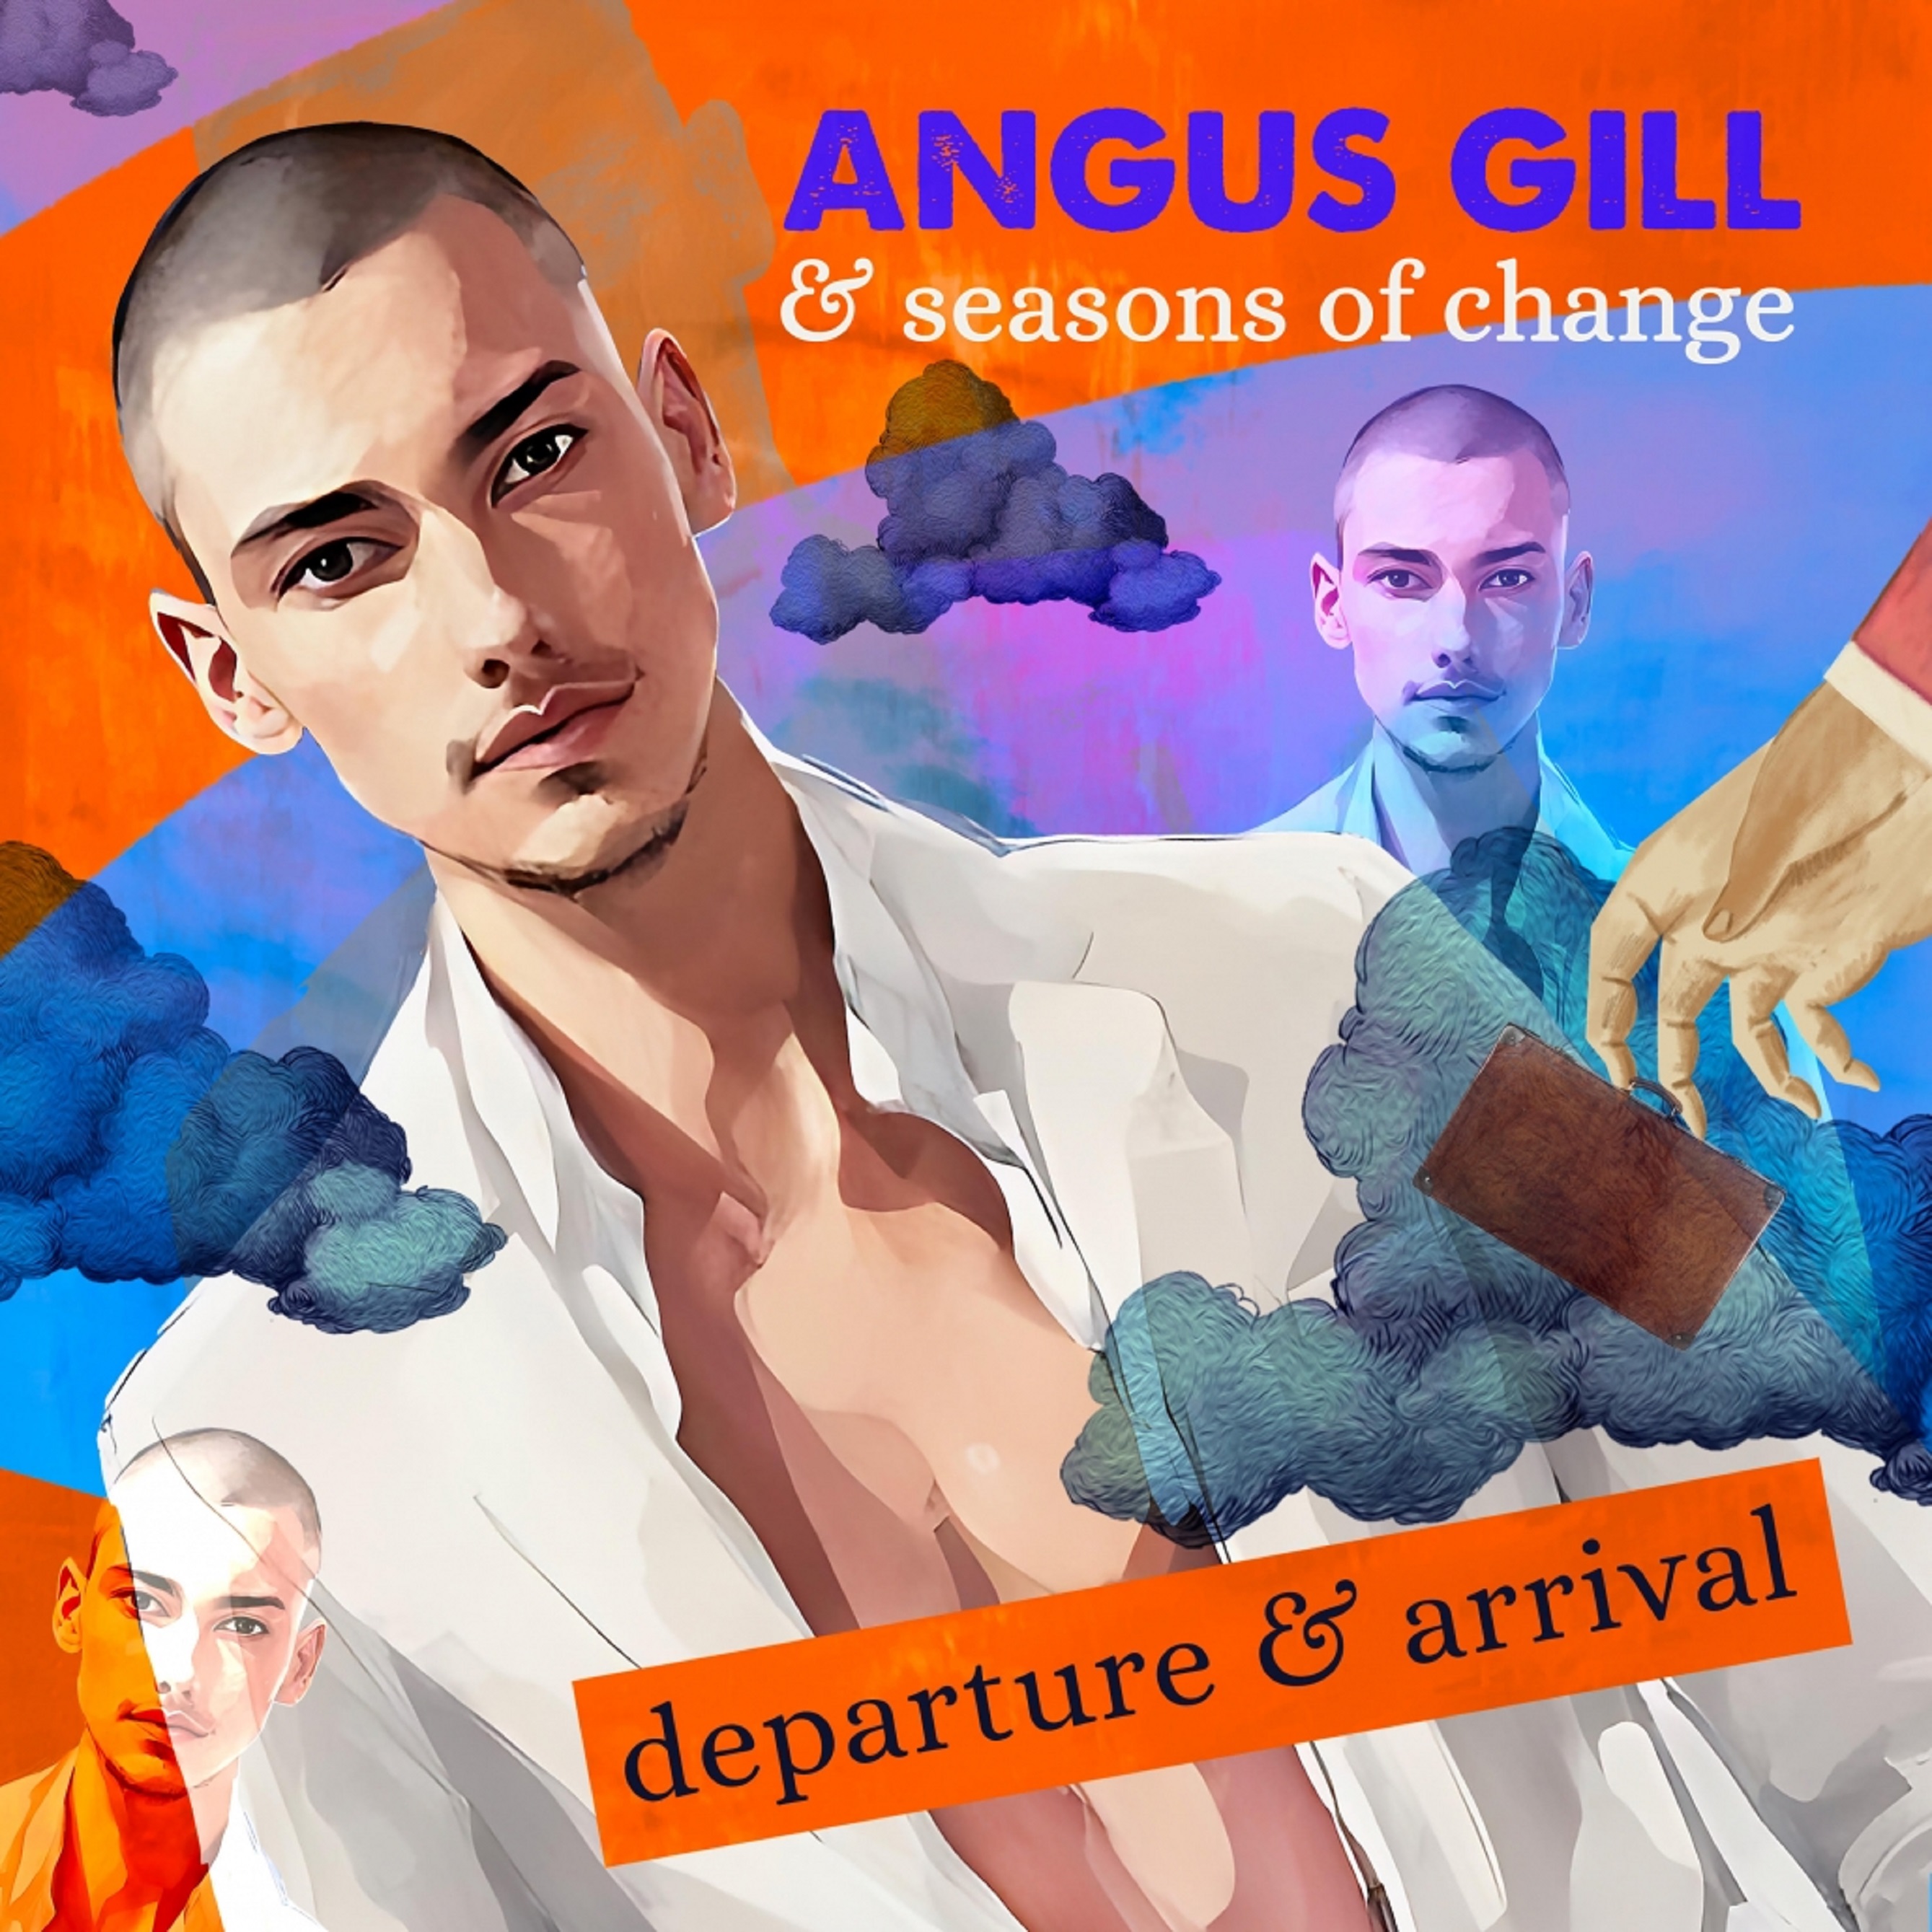 Angus Gill Unveils Genre-Defying Fifth Album "Departure & Arrival" and Drops Captivating Single "Crying Out for Love"